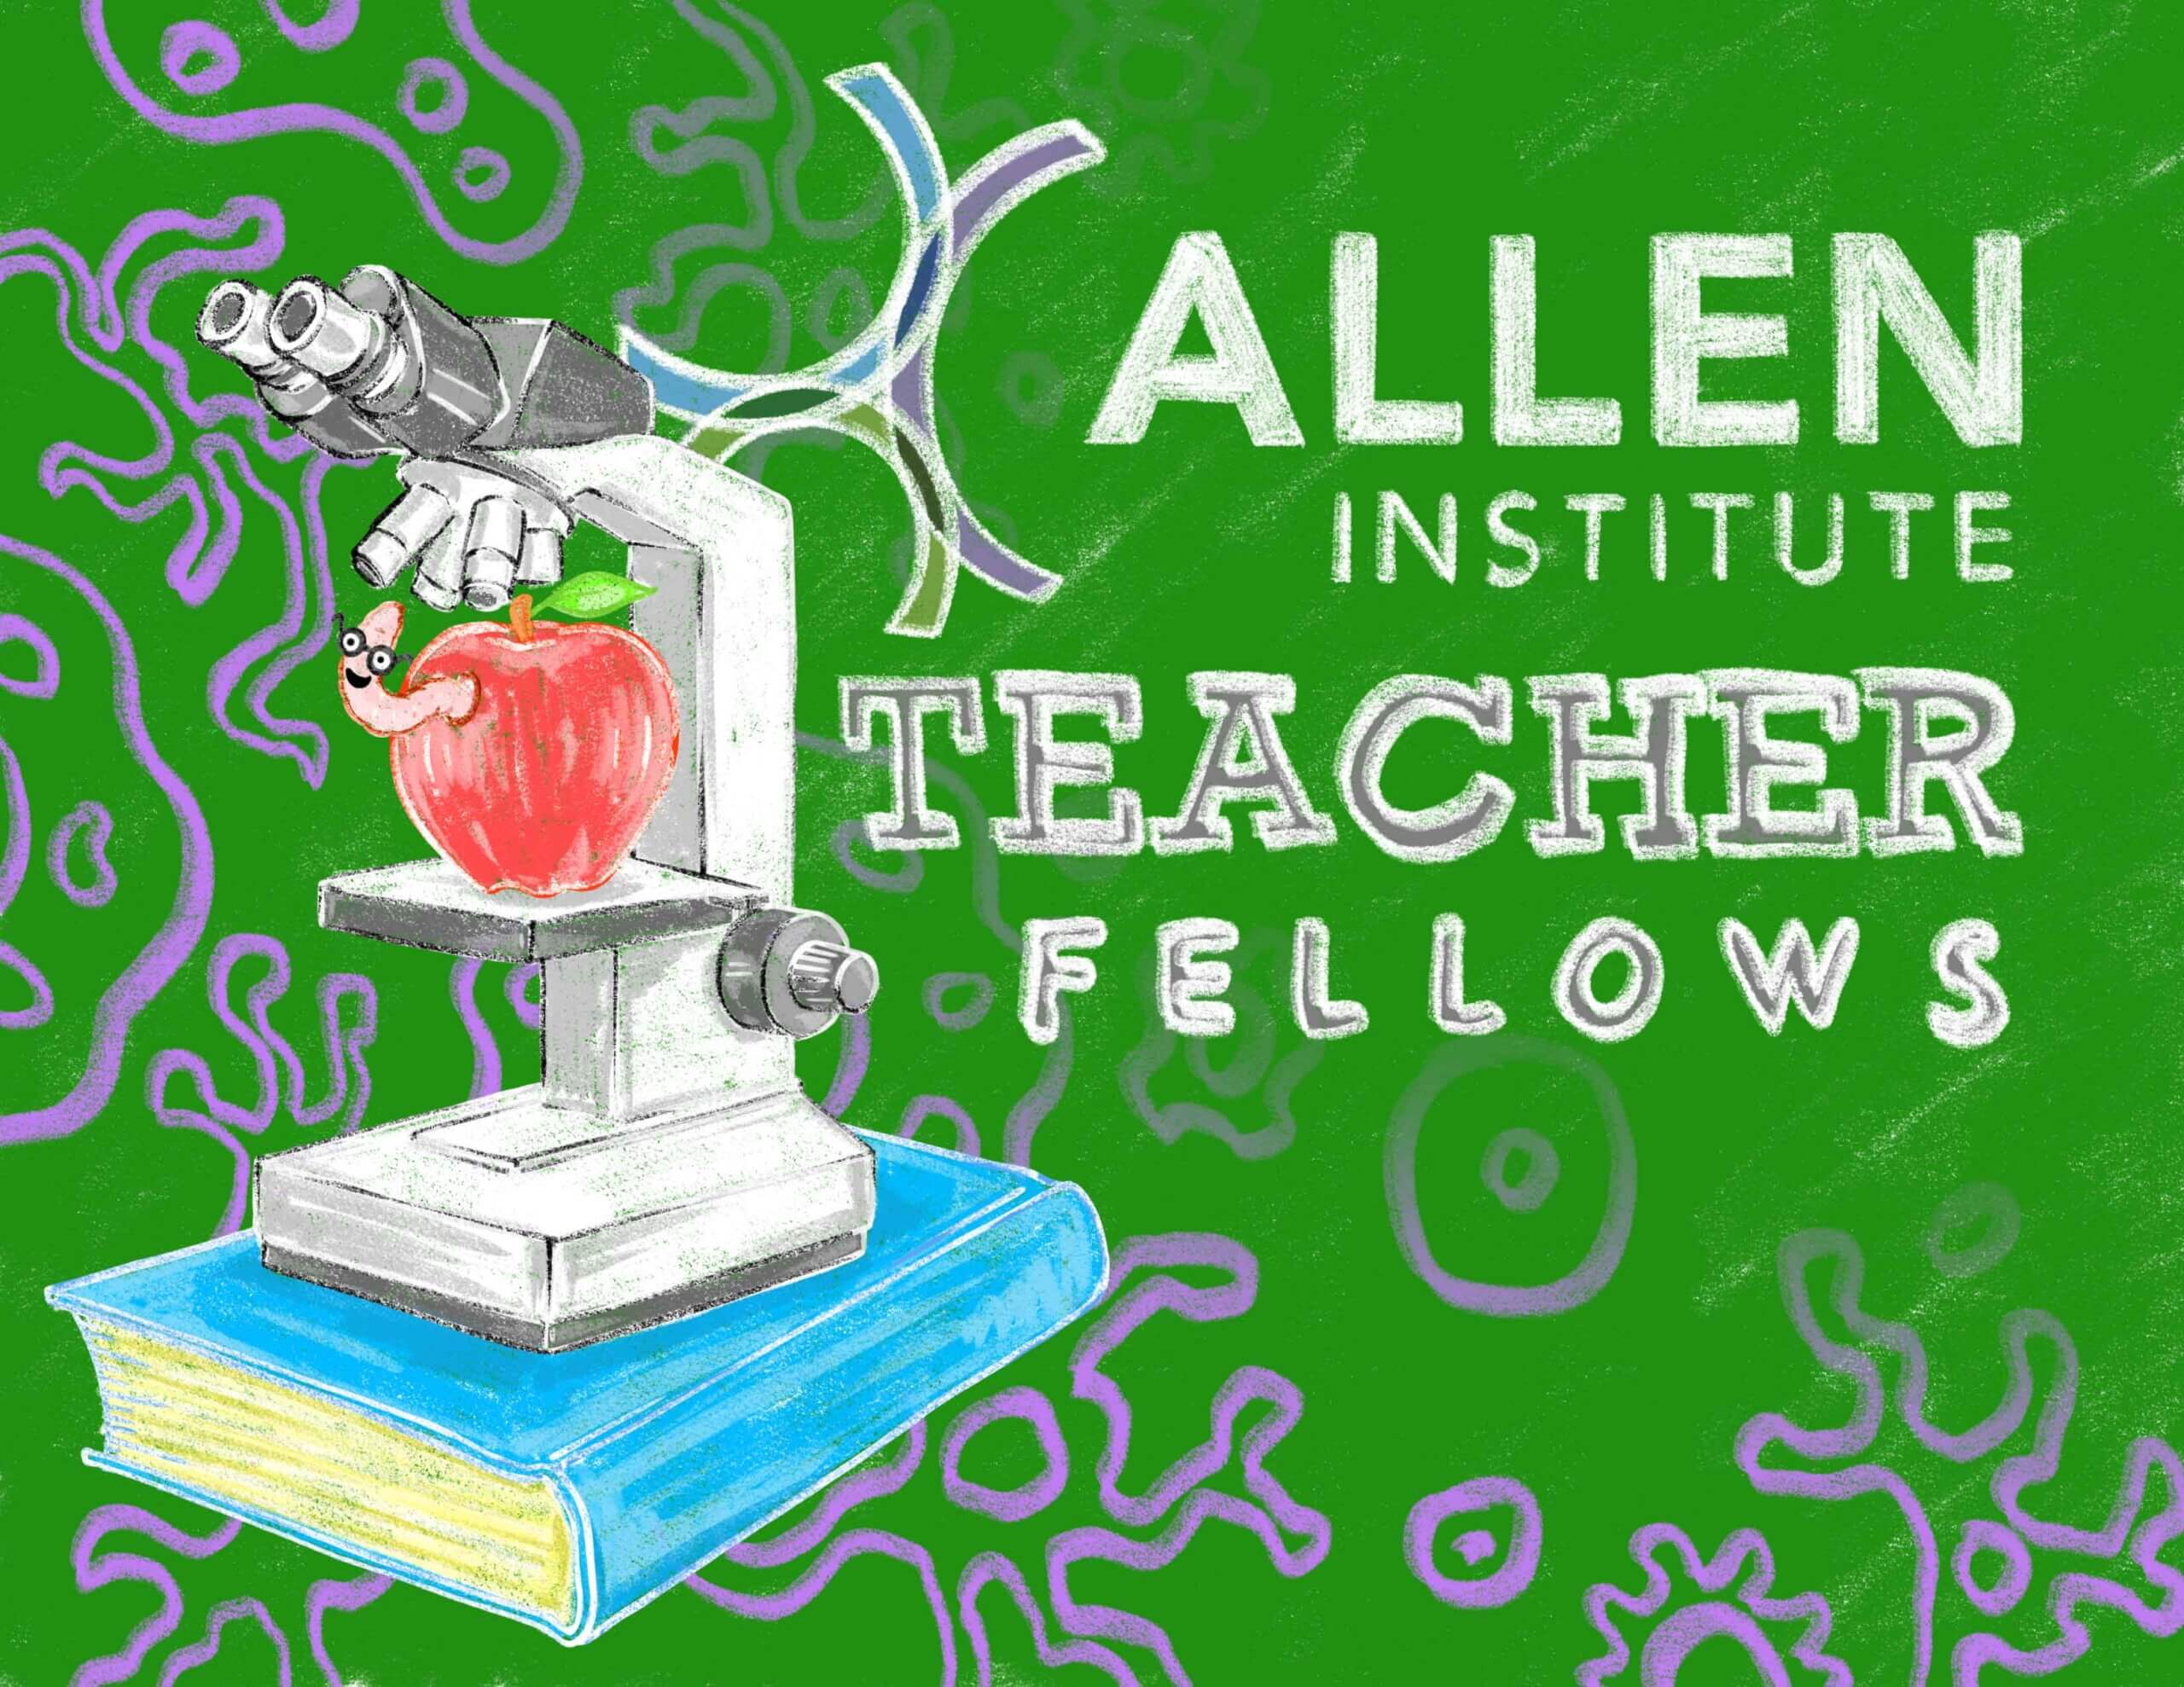 Green chalk board with graphing paper and sketched cells laid over it. A microscope sits atop a blue book, and a red apple with a worm with glasses extending out sits underneath the microscope lenses. Written in chalk-like text is the Allen Institute with it's blue, green, and purple half circle logo with "Teacher Fellows" written in rainbow chalk colors.